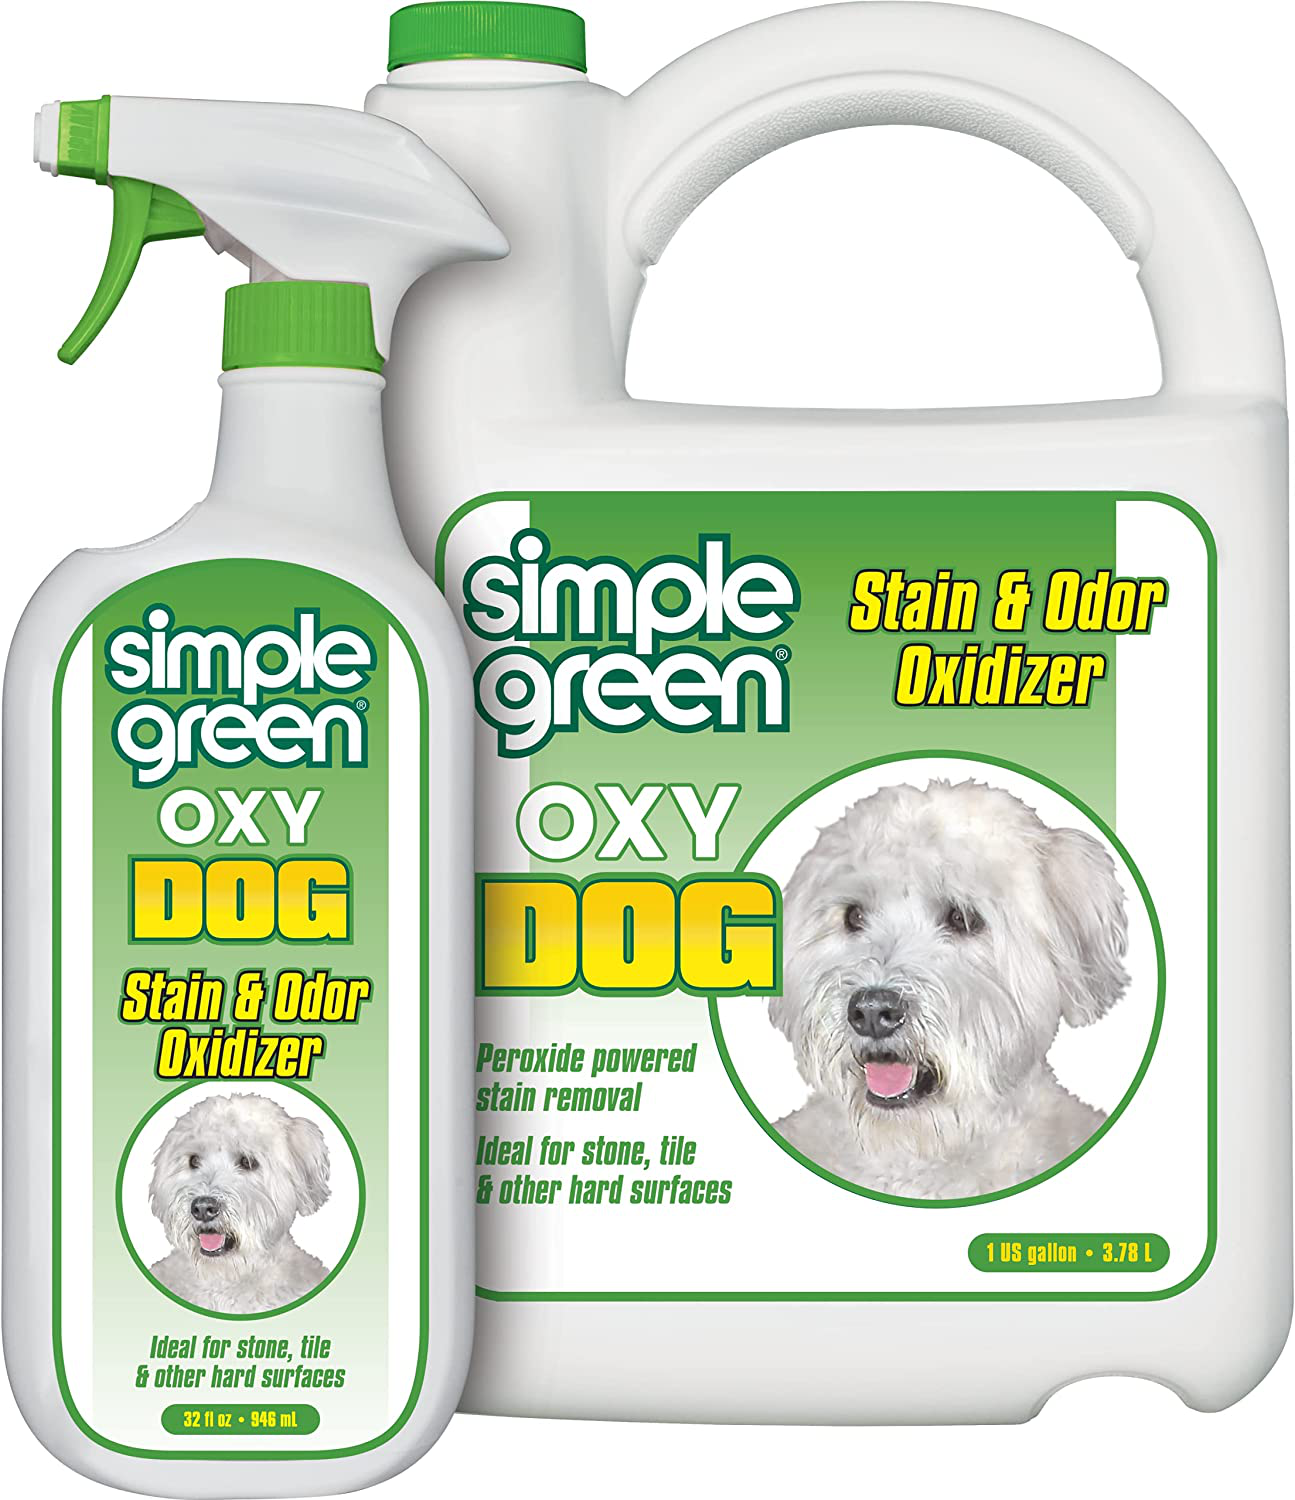 Simple Green Oxy Dog Stain and Odor Oxidizer – Peroxide Cleaner for Urine, Feces, Vomit, Drool